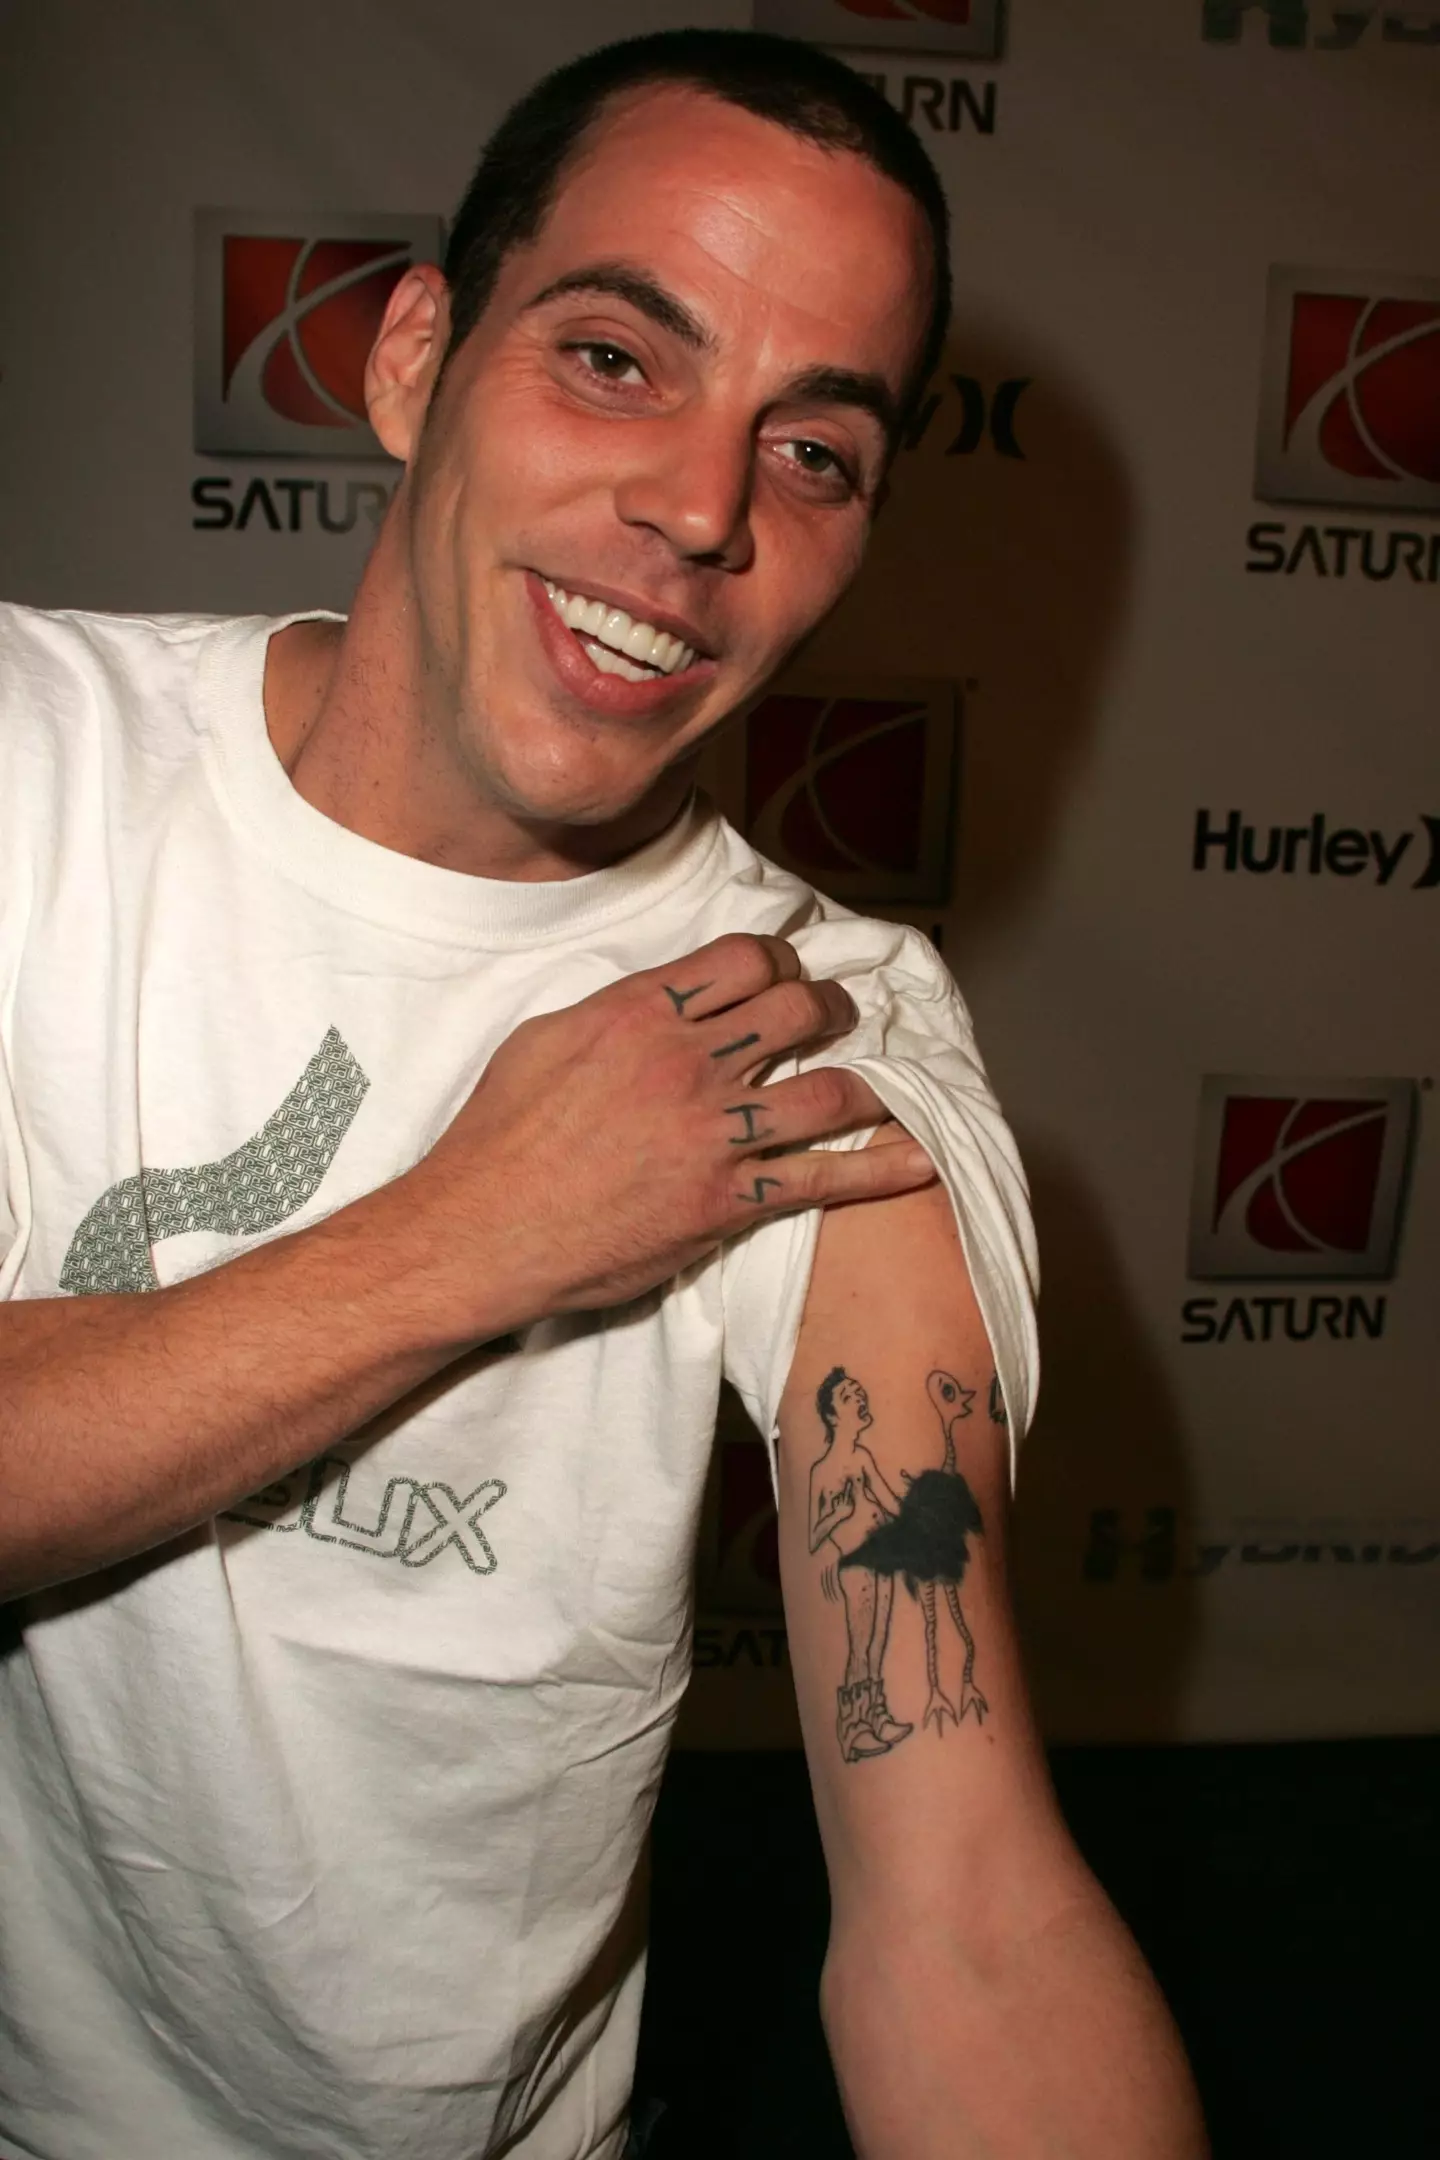 Steve-O realised the tattoo was "a serious mistake."